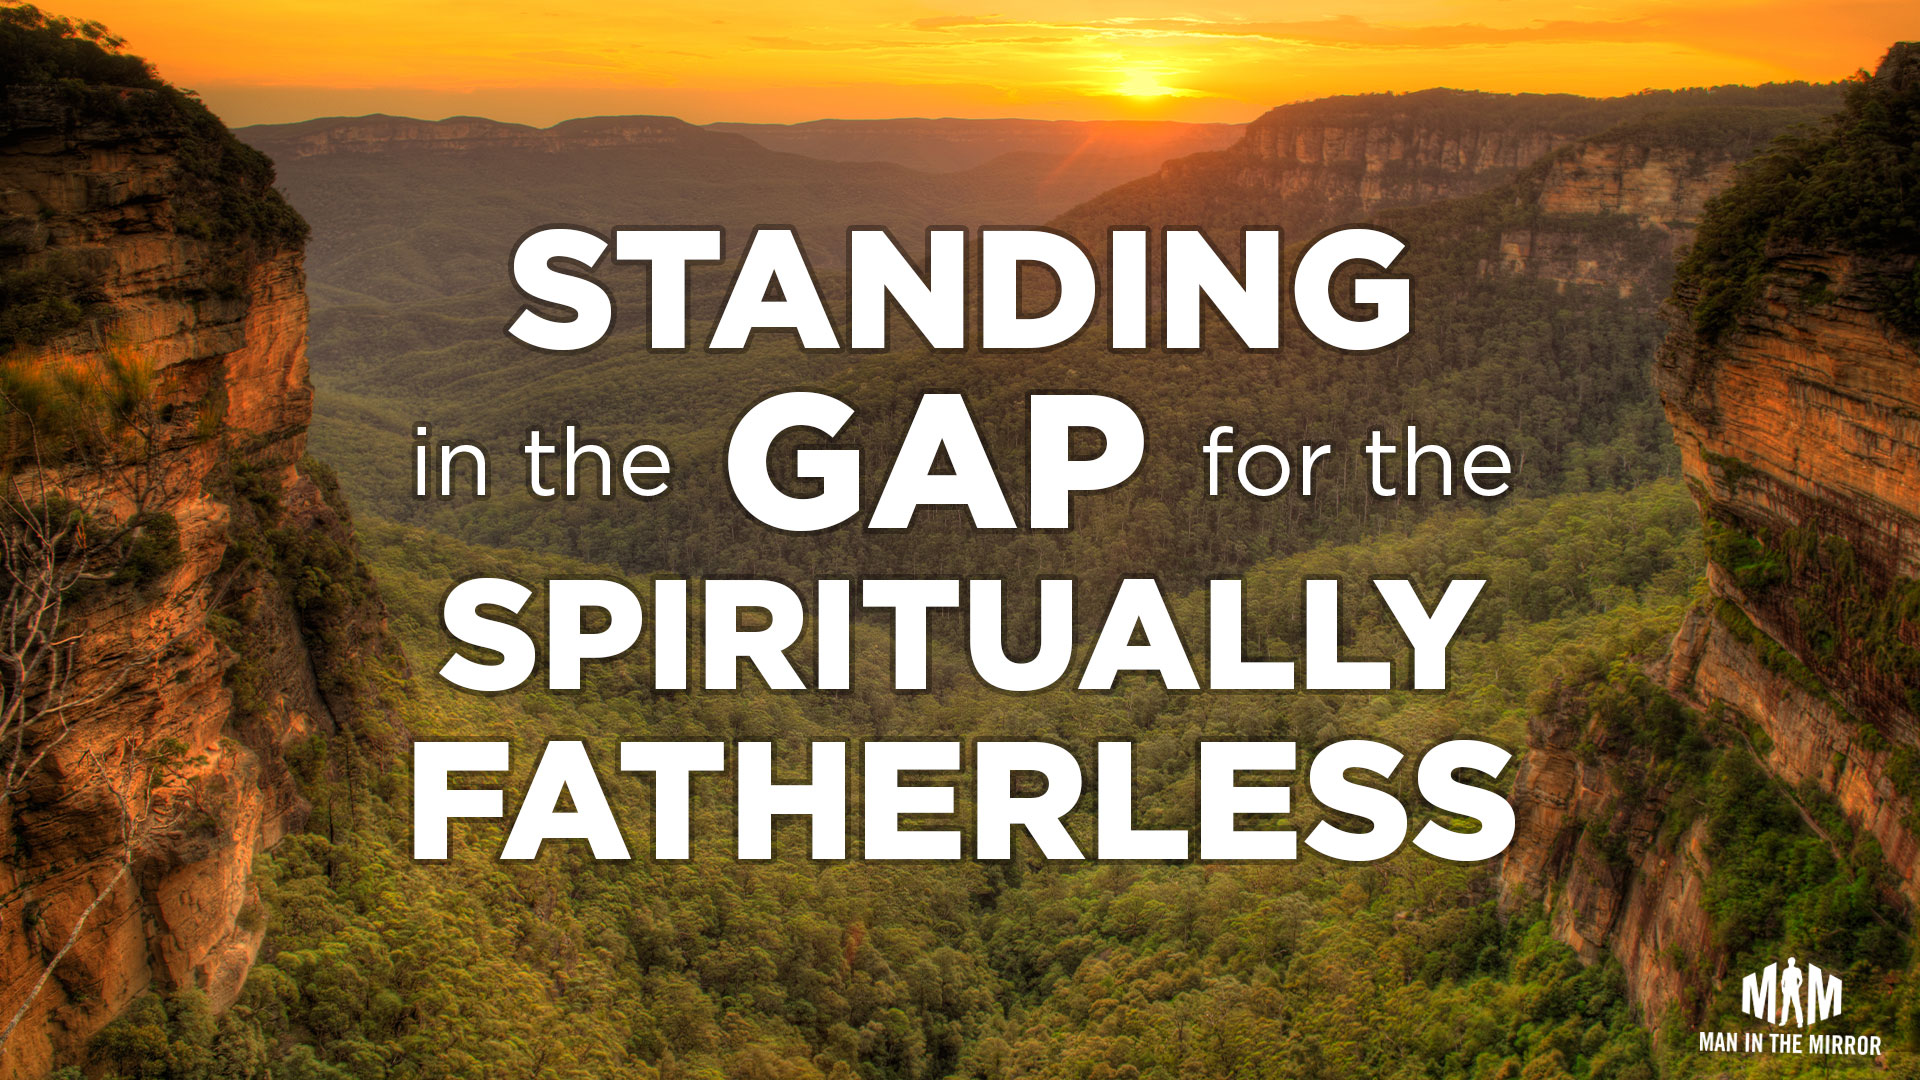 Standing in the gap for the spiritually fatherless